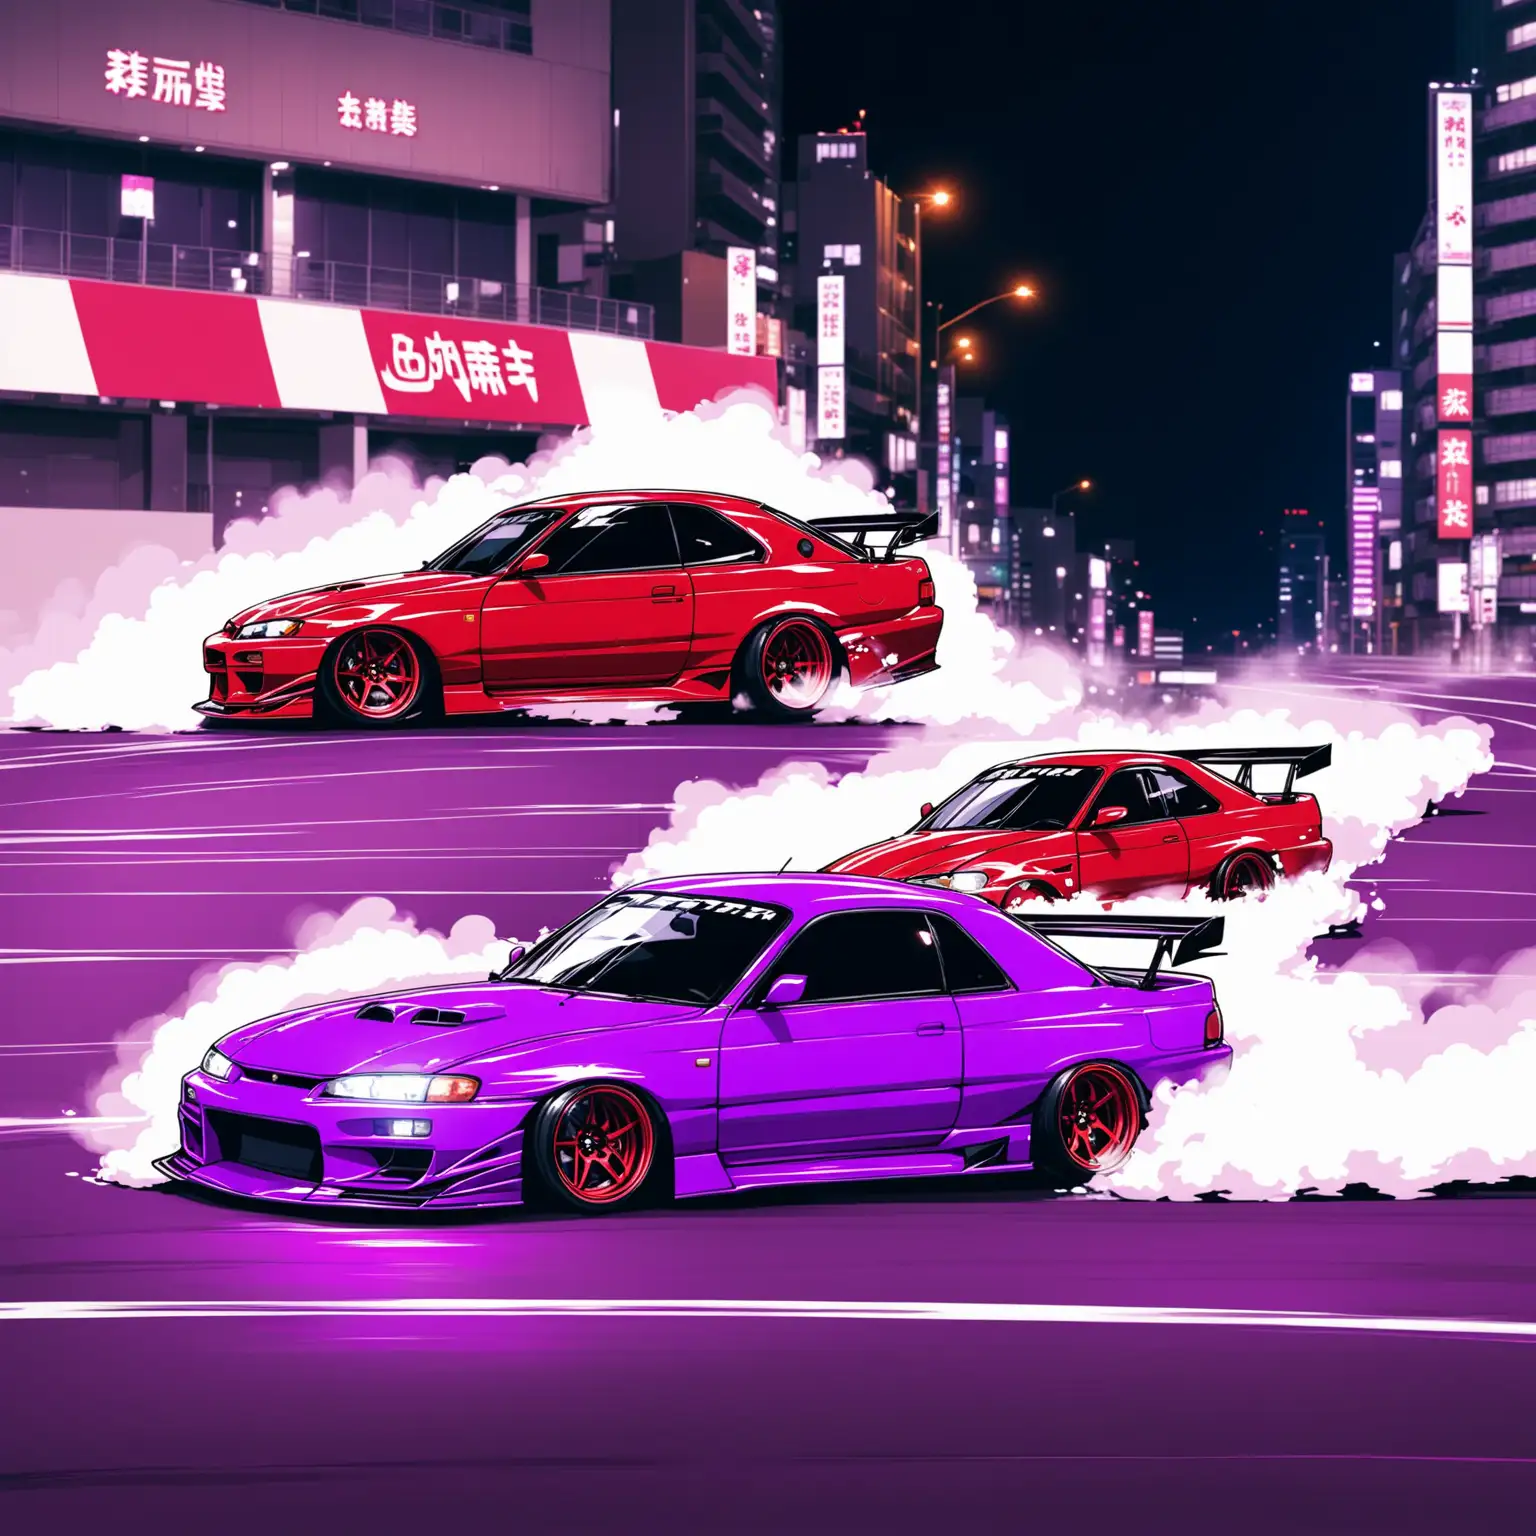 Urban-Car-Drift-Japan-in-Purple-and-Red